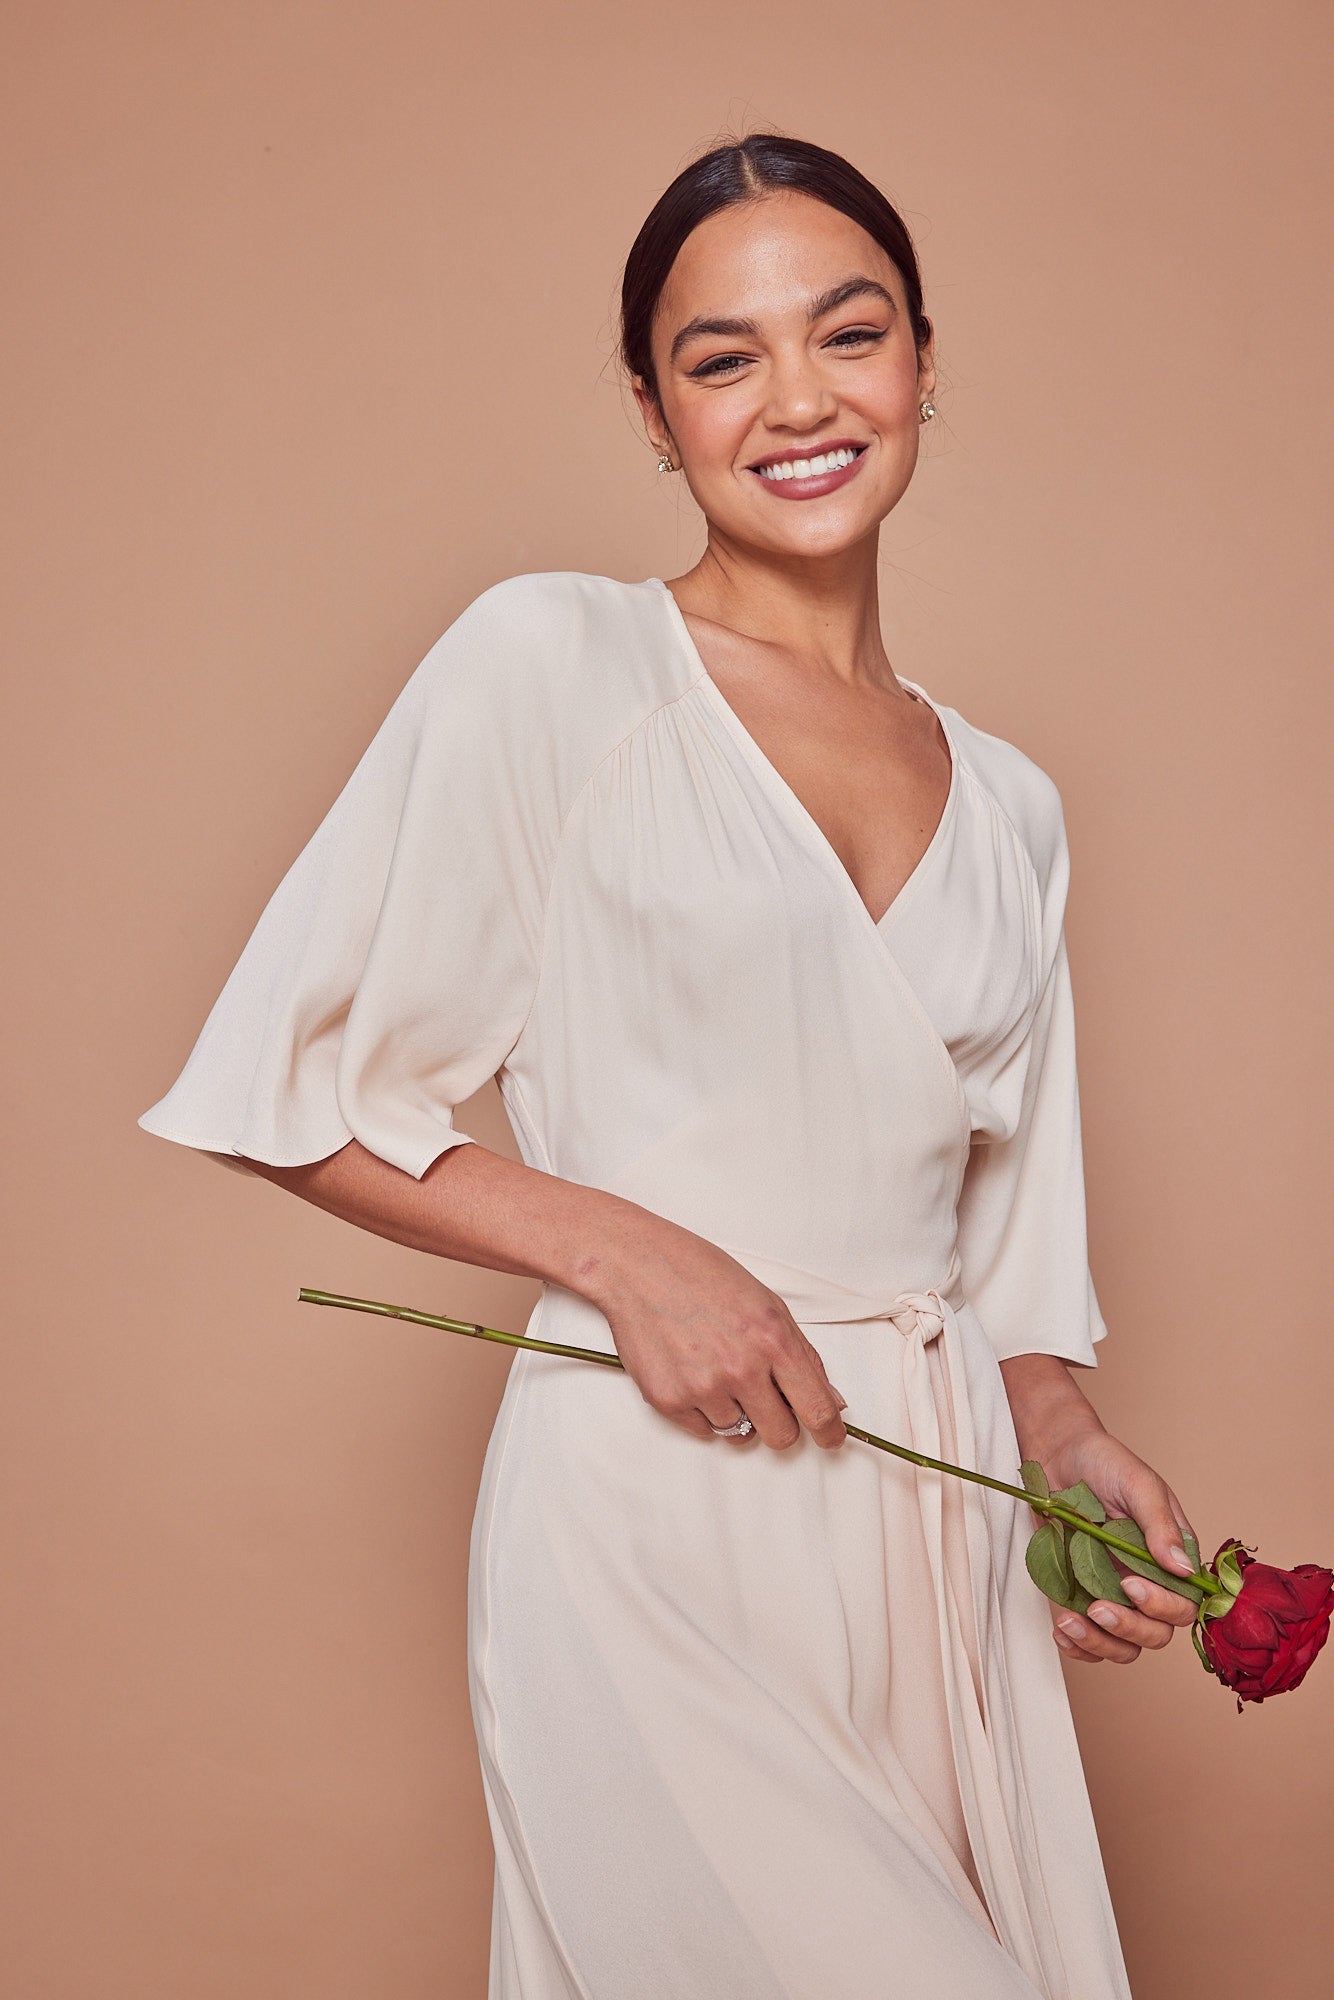 Margot Satin Wrap Dress - Champagne Ivory - Maids to Measure